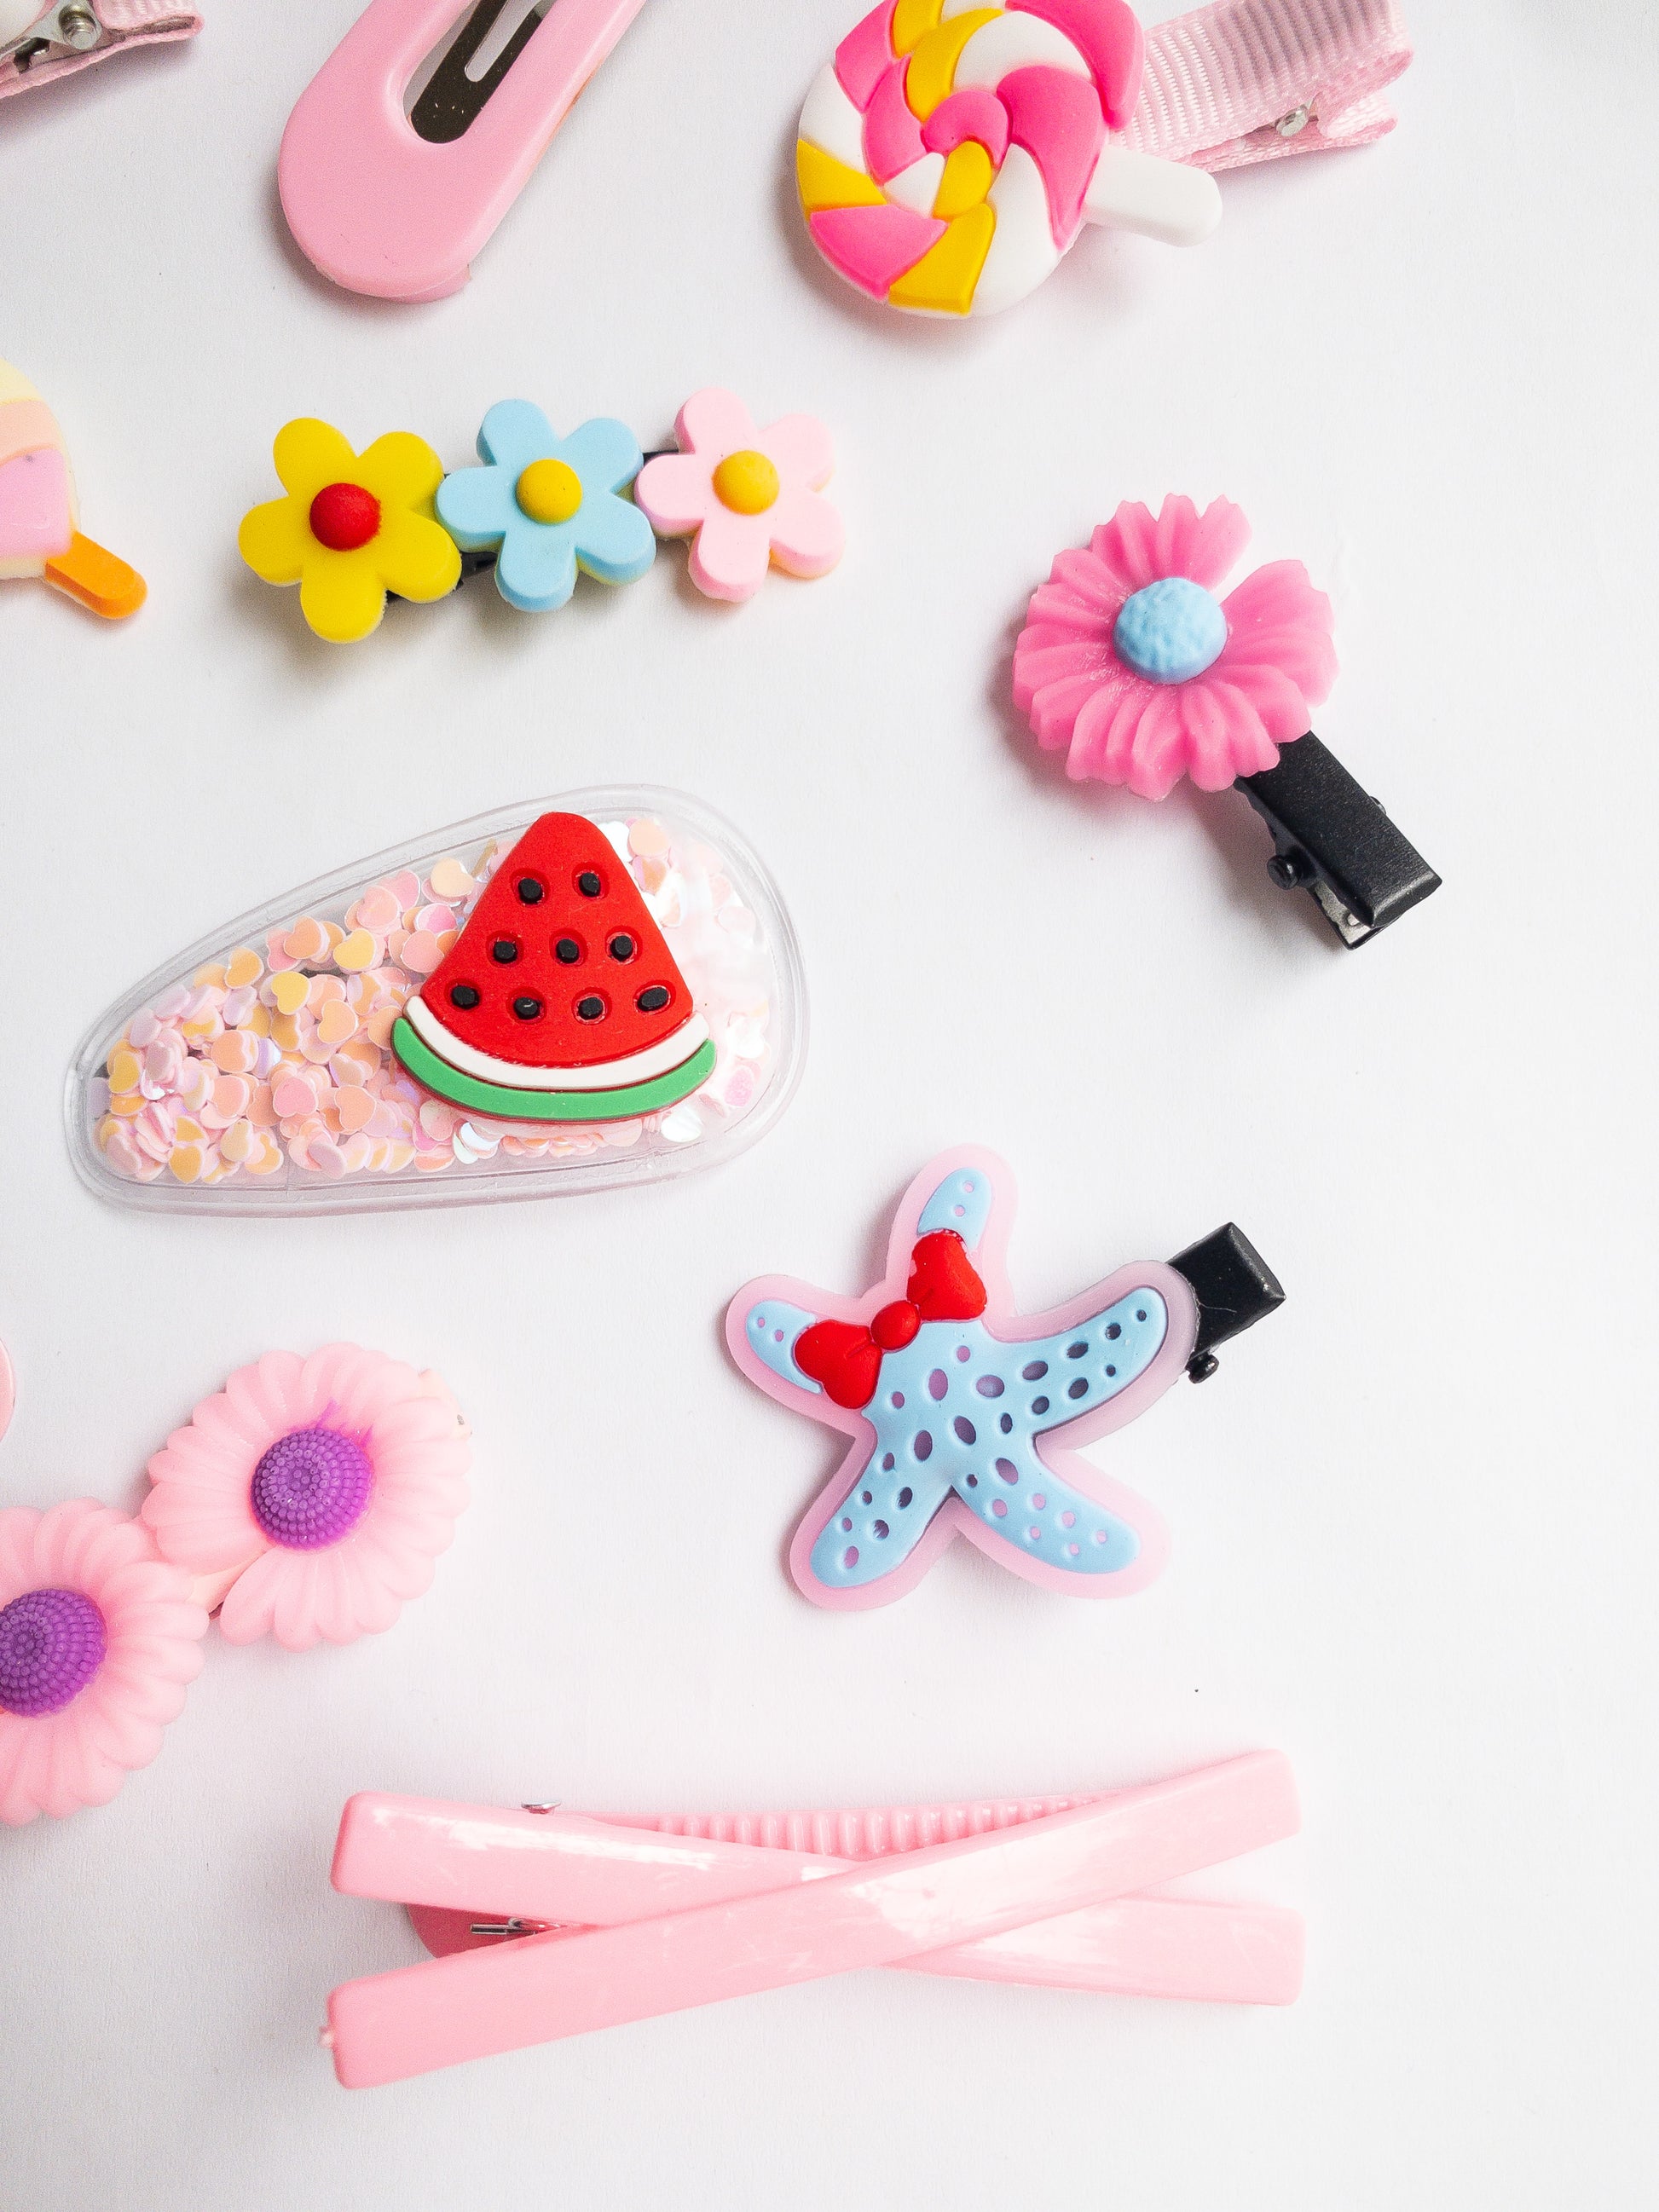 It's THE summer hair clip set! This 14 piece collection has everything--watermelons, flowers, whimsical lollipops, a bright rainbow, a starfish, and a couple pink classics.